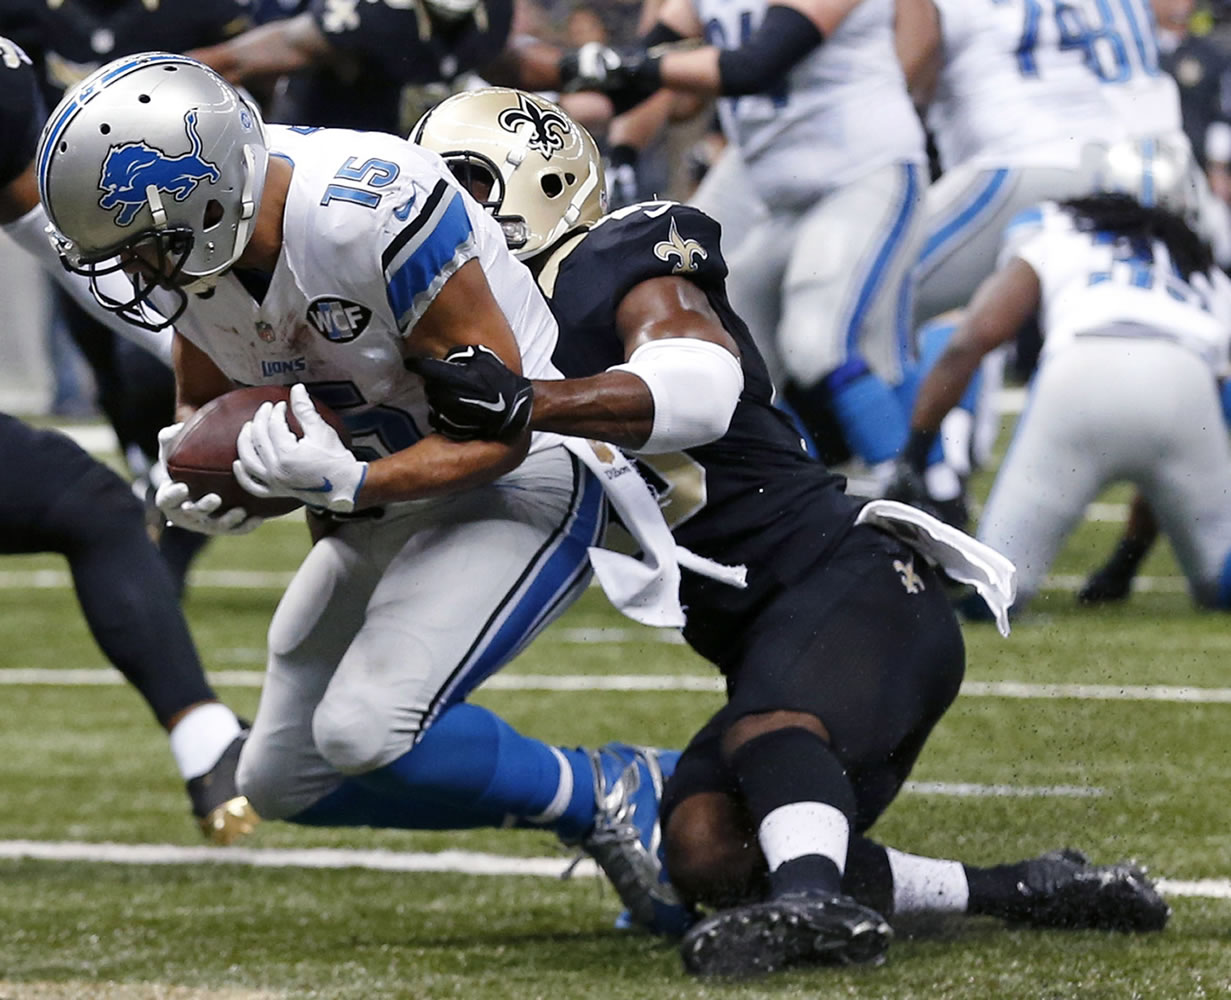 Detroit Lions wide receiver Golden Tate (15) pulls in a touchdown reception as New Orleans Saints cornerback Delvin Breaux tries to tackle in the first half of an NFL football game in New Orleans, Monday, Dec. 21, 2015.